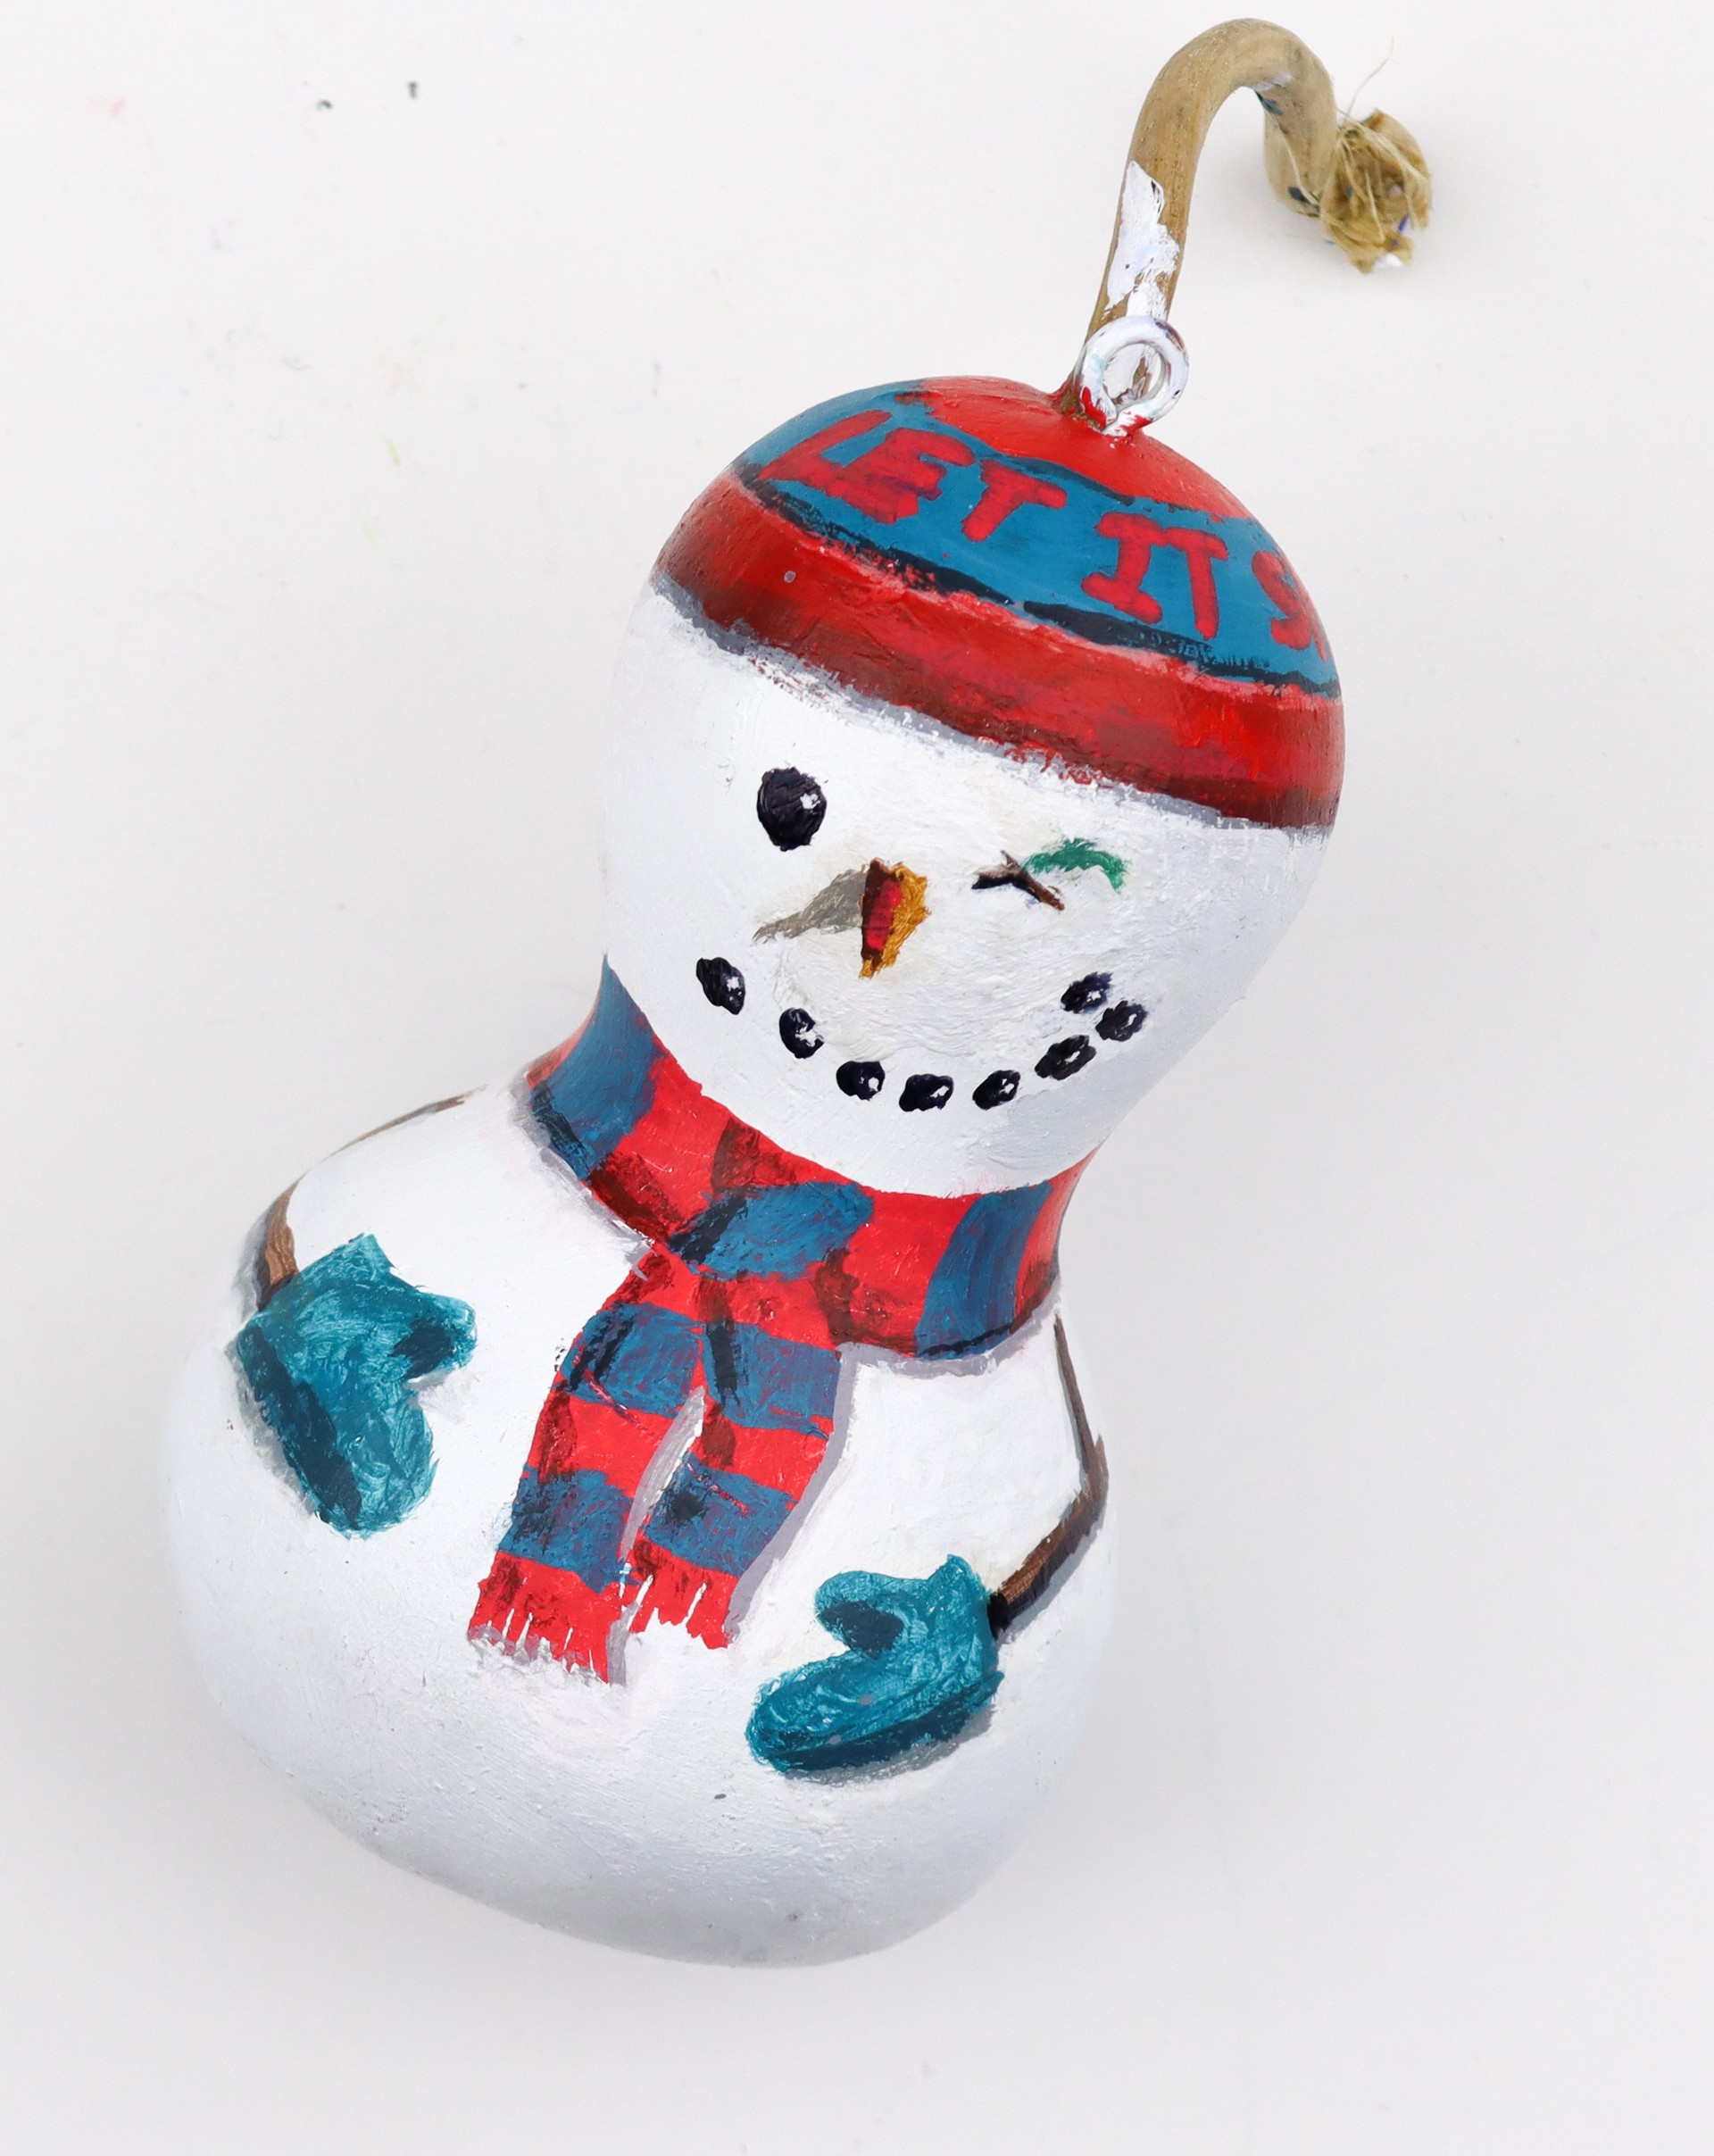 Winking Snowman (gourd ornament) by Mike Knox